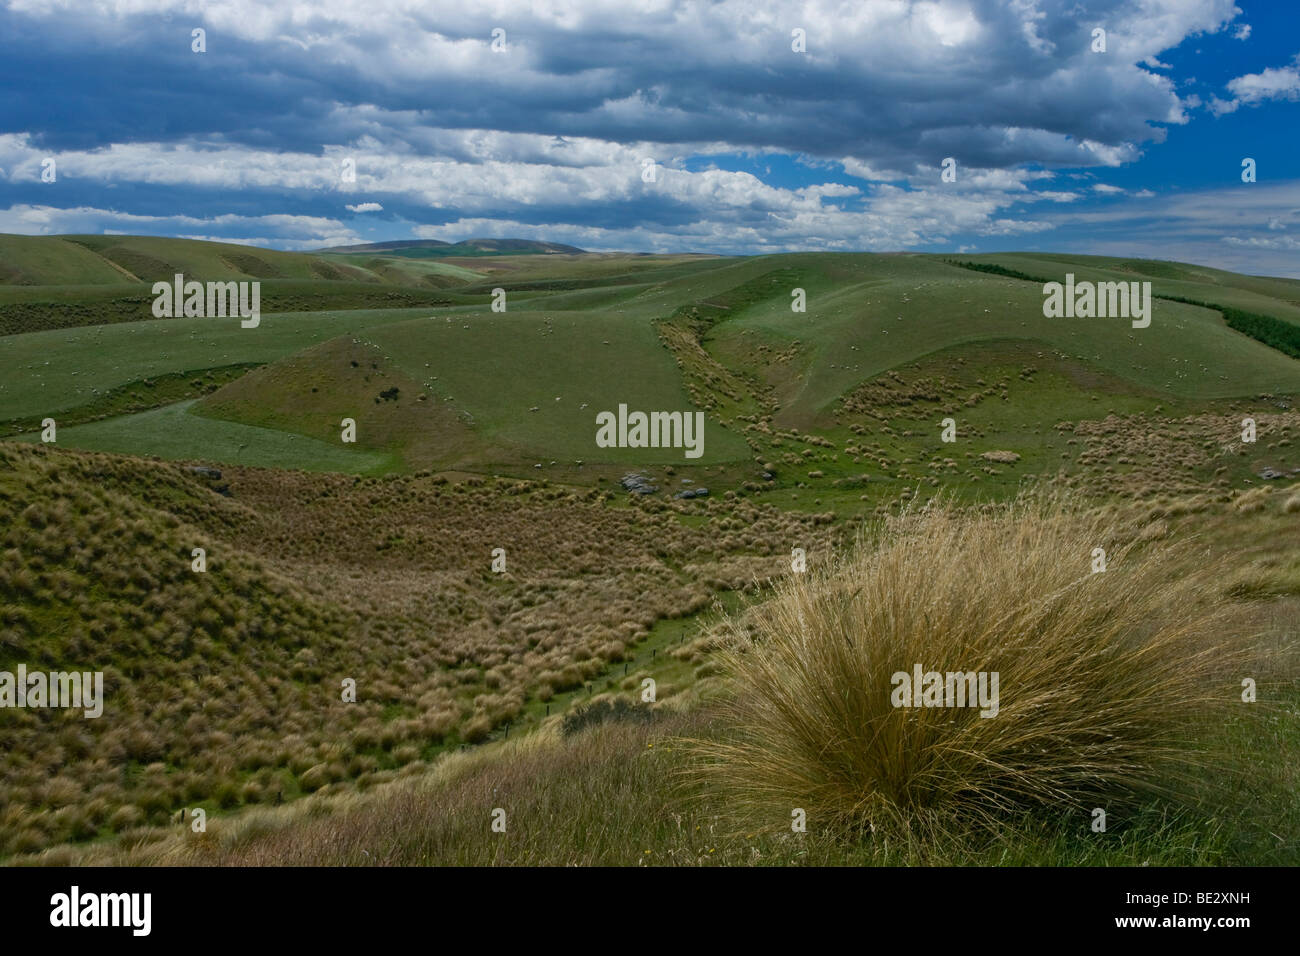 Hilly landscape with clumps of grass, Lake Onslow, South Island, New Zealand Stock Photo